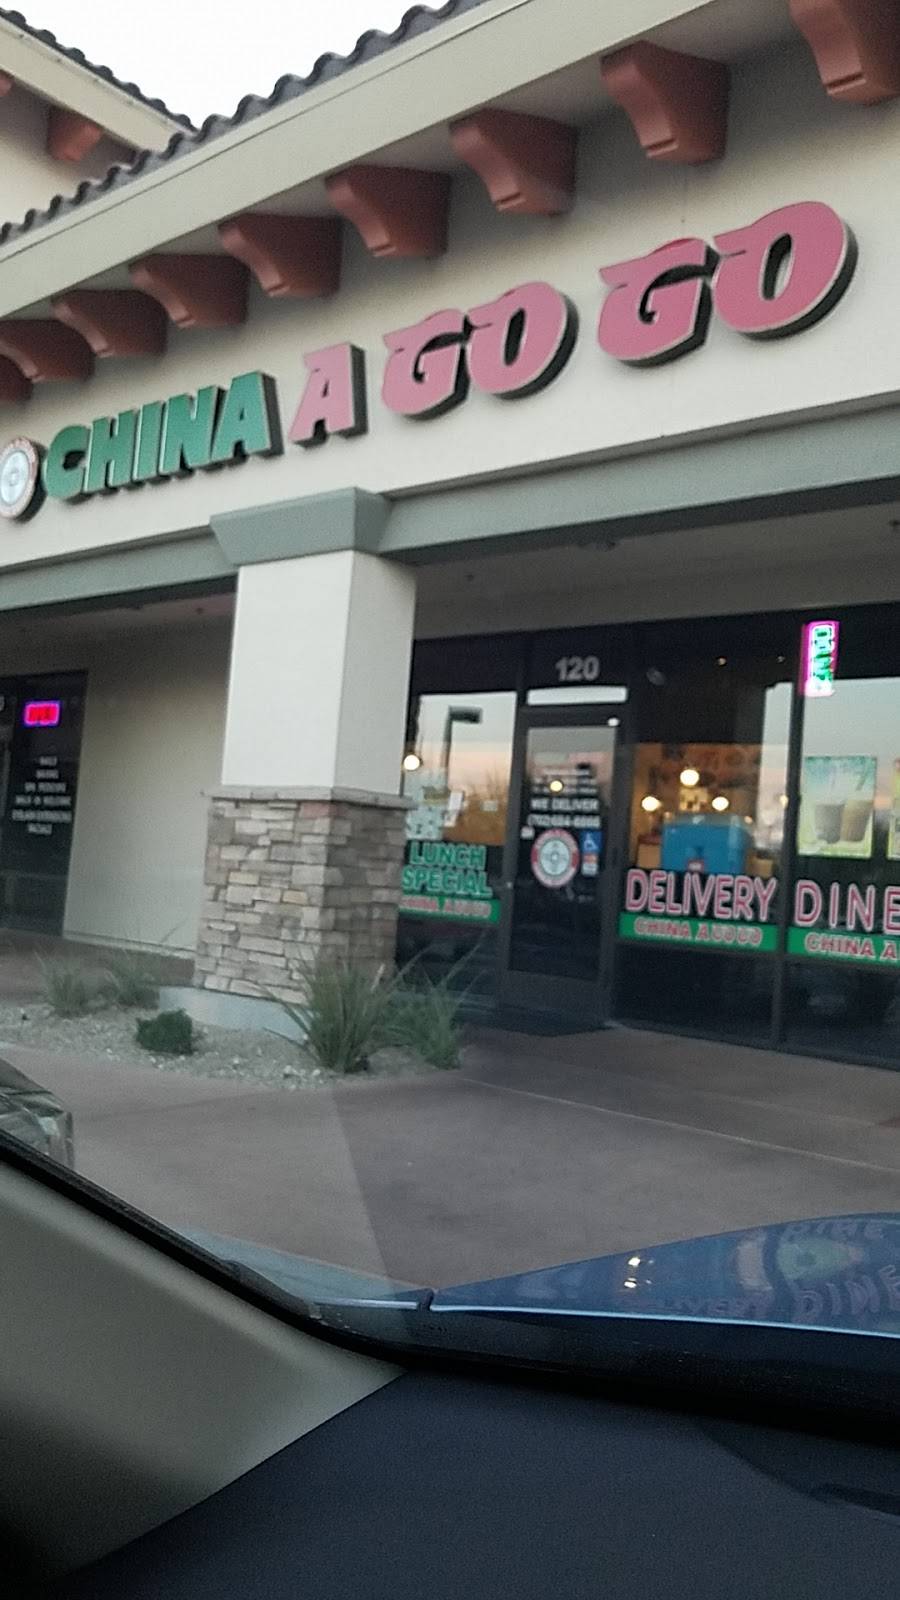 China A Go Go | meal delivery | 10450 W Cheyenne Ave, Las Vegas, NV 89129, USA | 7026846666 OR +1 702-684-6666